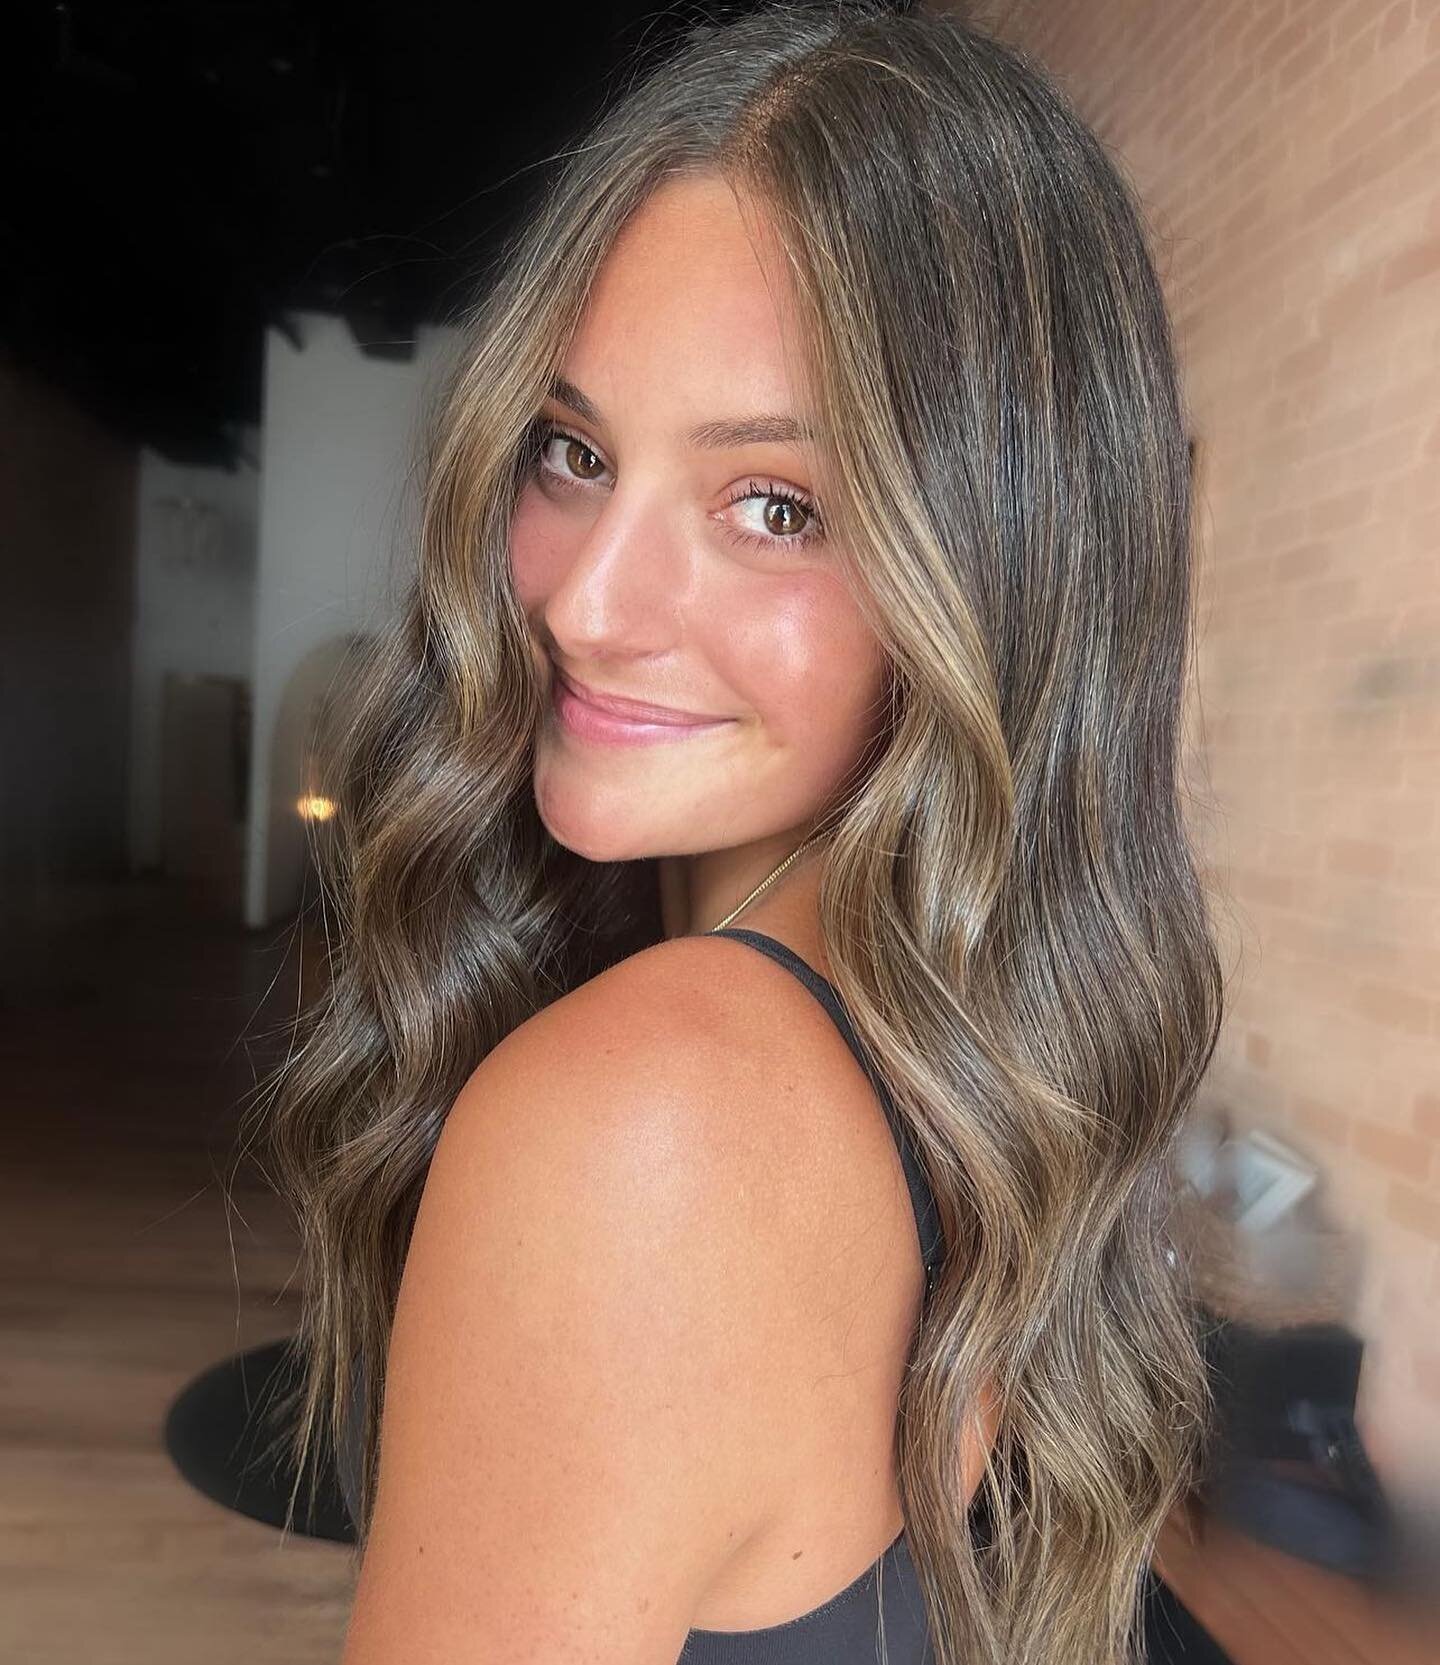 𝐌𝐄𝐒𝐒𝐀𝐆𝐄 𝐅𝐑𝐎𝐌 𝐓𝐇𝐄 𝐀𝐑𝐓𝐈𝐒𝐓 @sarahdidmyhair

&ldquo;I love creating gorgeous dimensional brunettes!

Great way to go brighter for summer and can still tone down for fall but keep it dimensional without having to lighten it.

Lightened